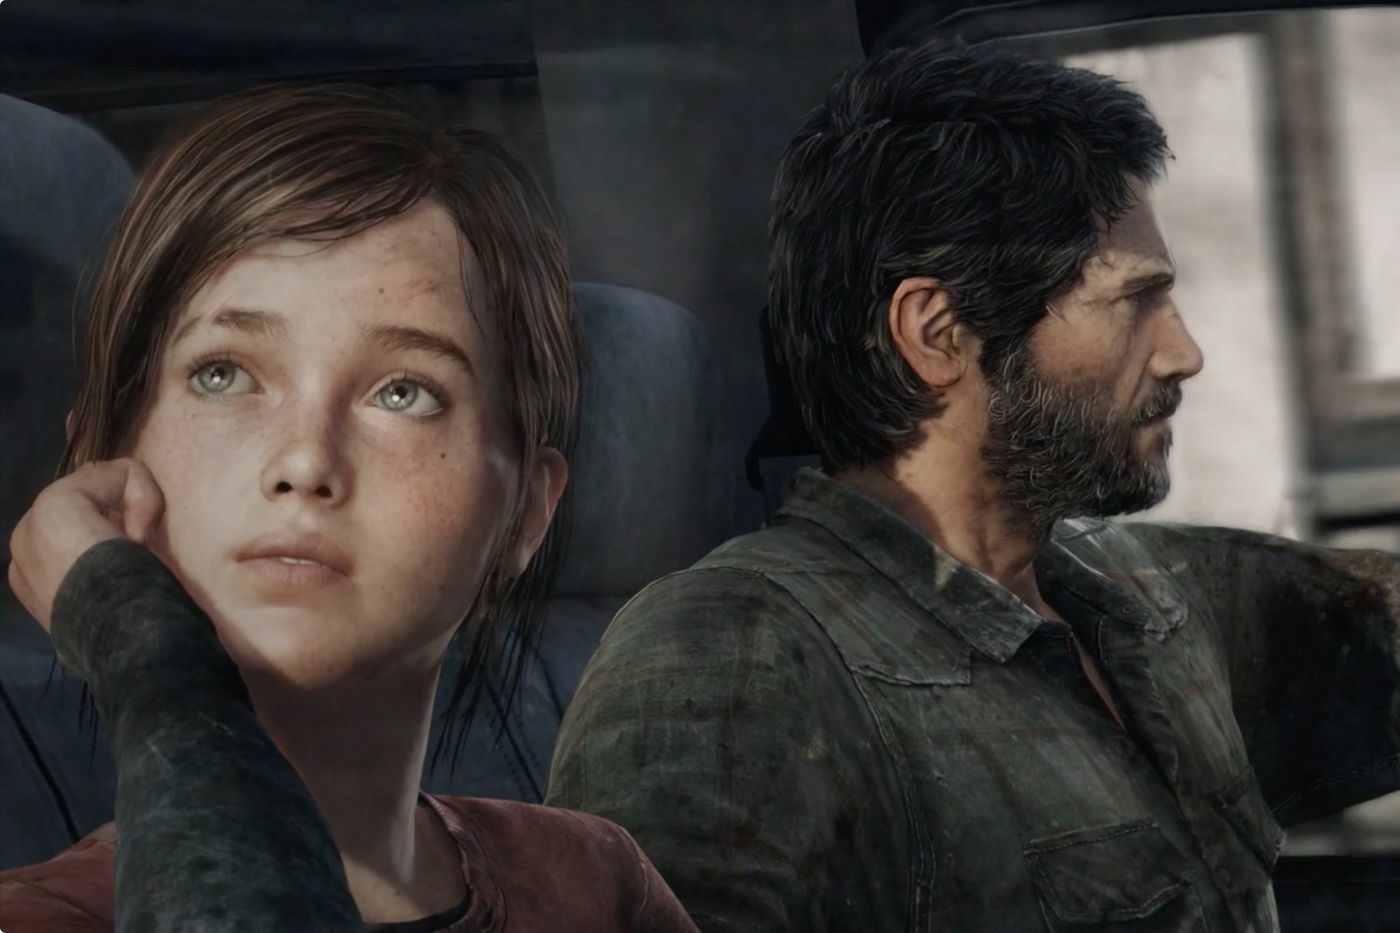 the last of us Ellie and Joel characters